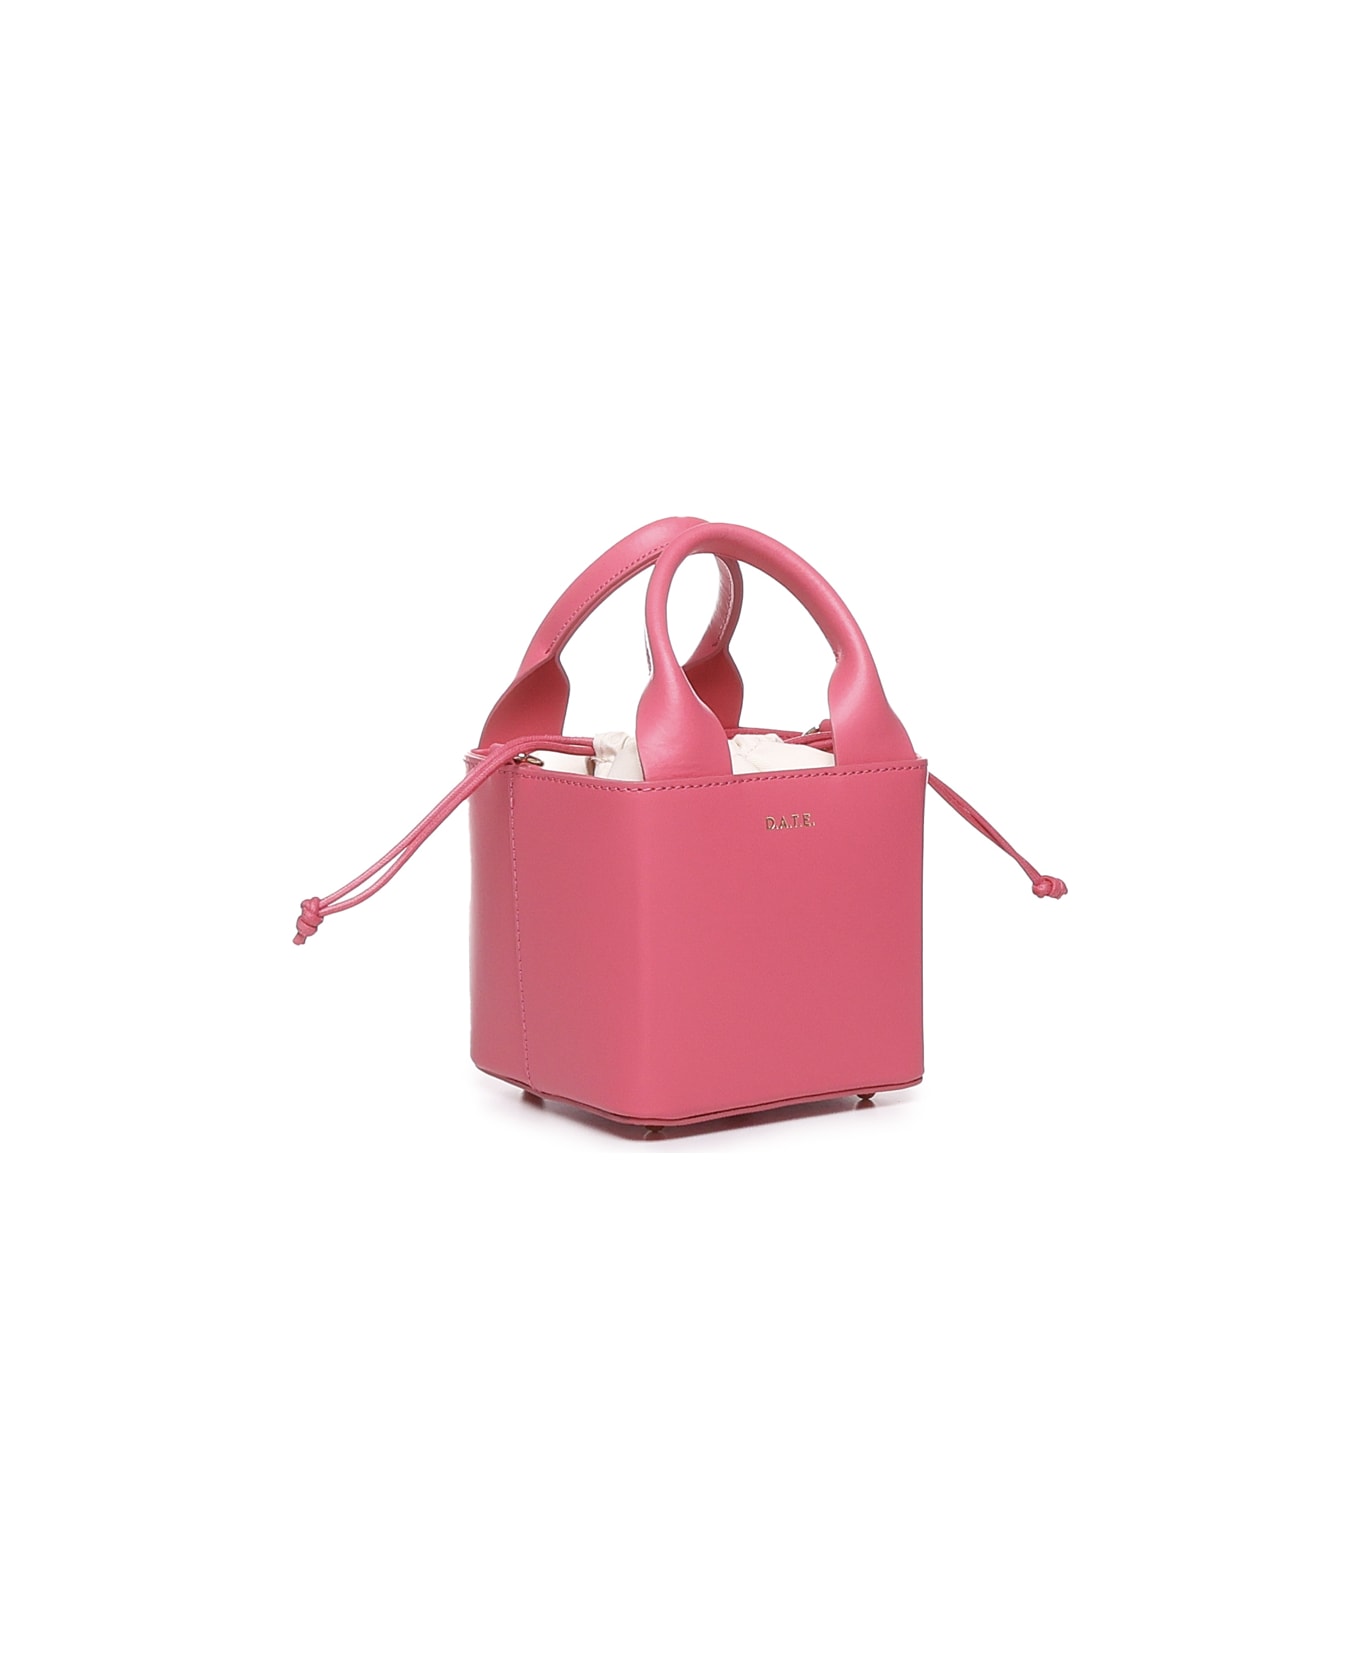 D.A.T.E. Cube Bag In Leather - Pink トートバッグ